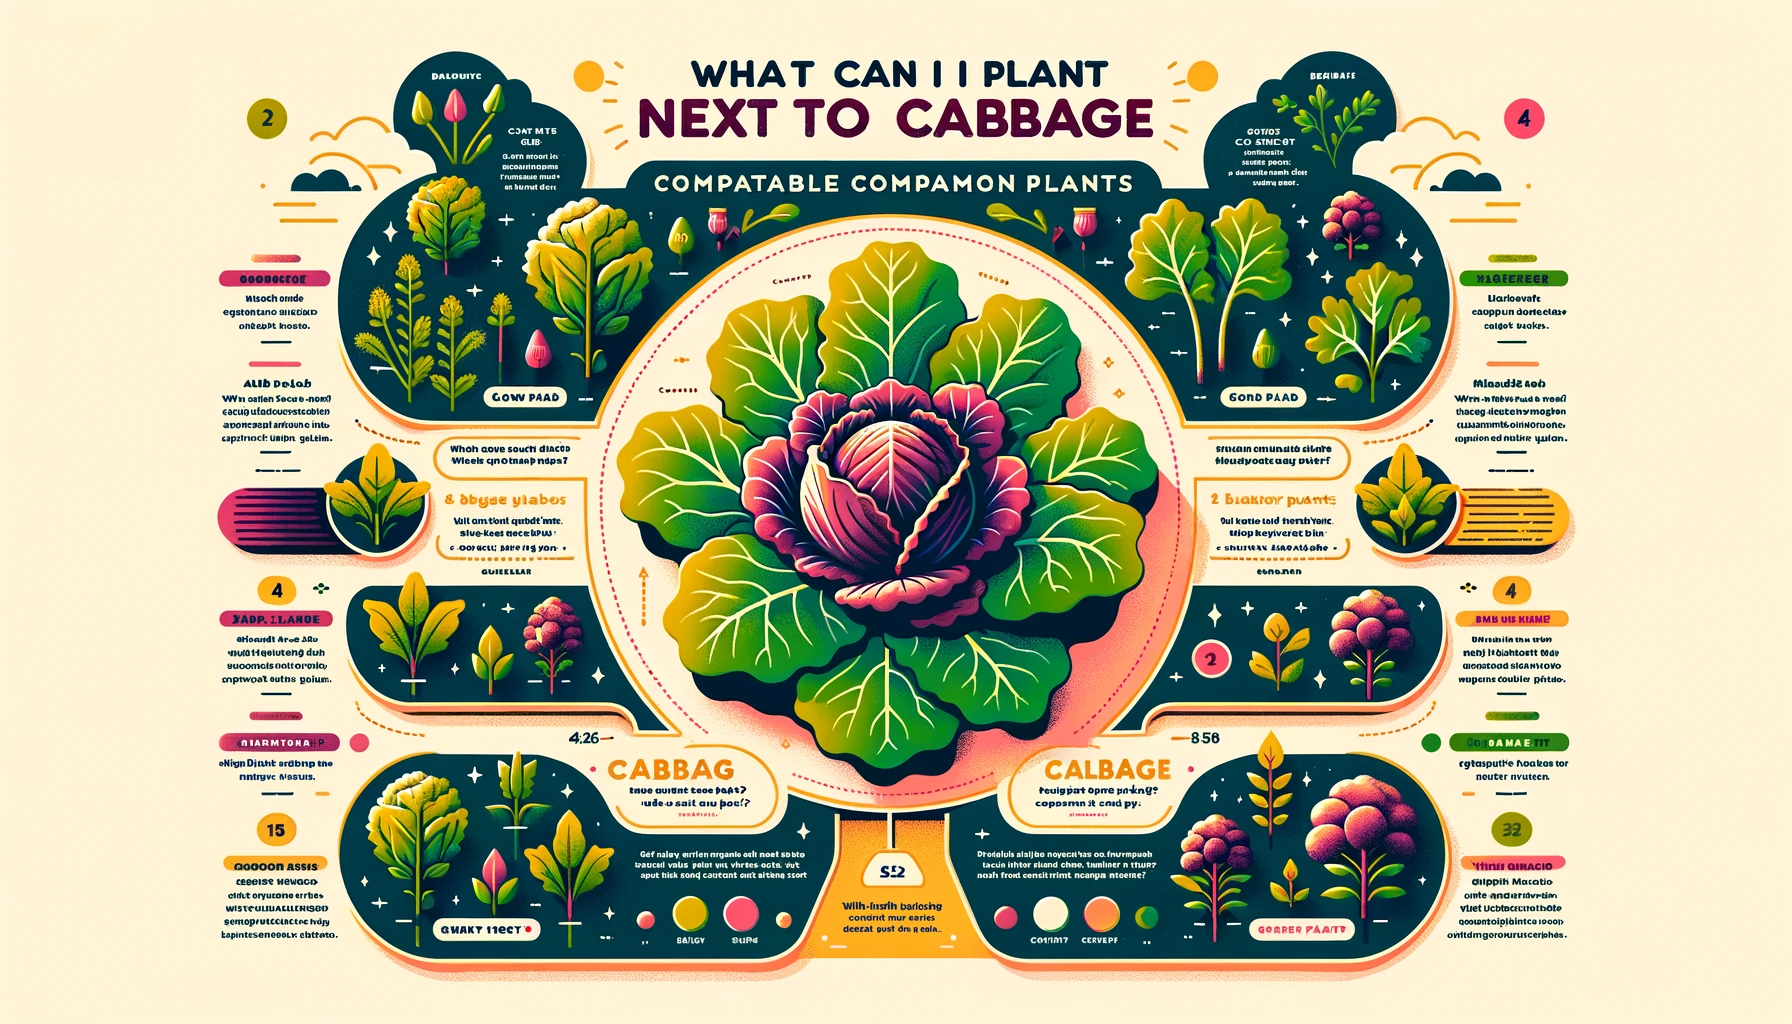 What Can I Plant Next to Cabbage: Harmonious Gardens